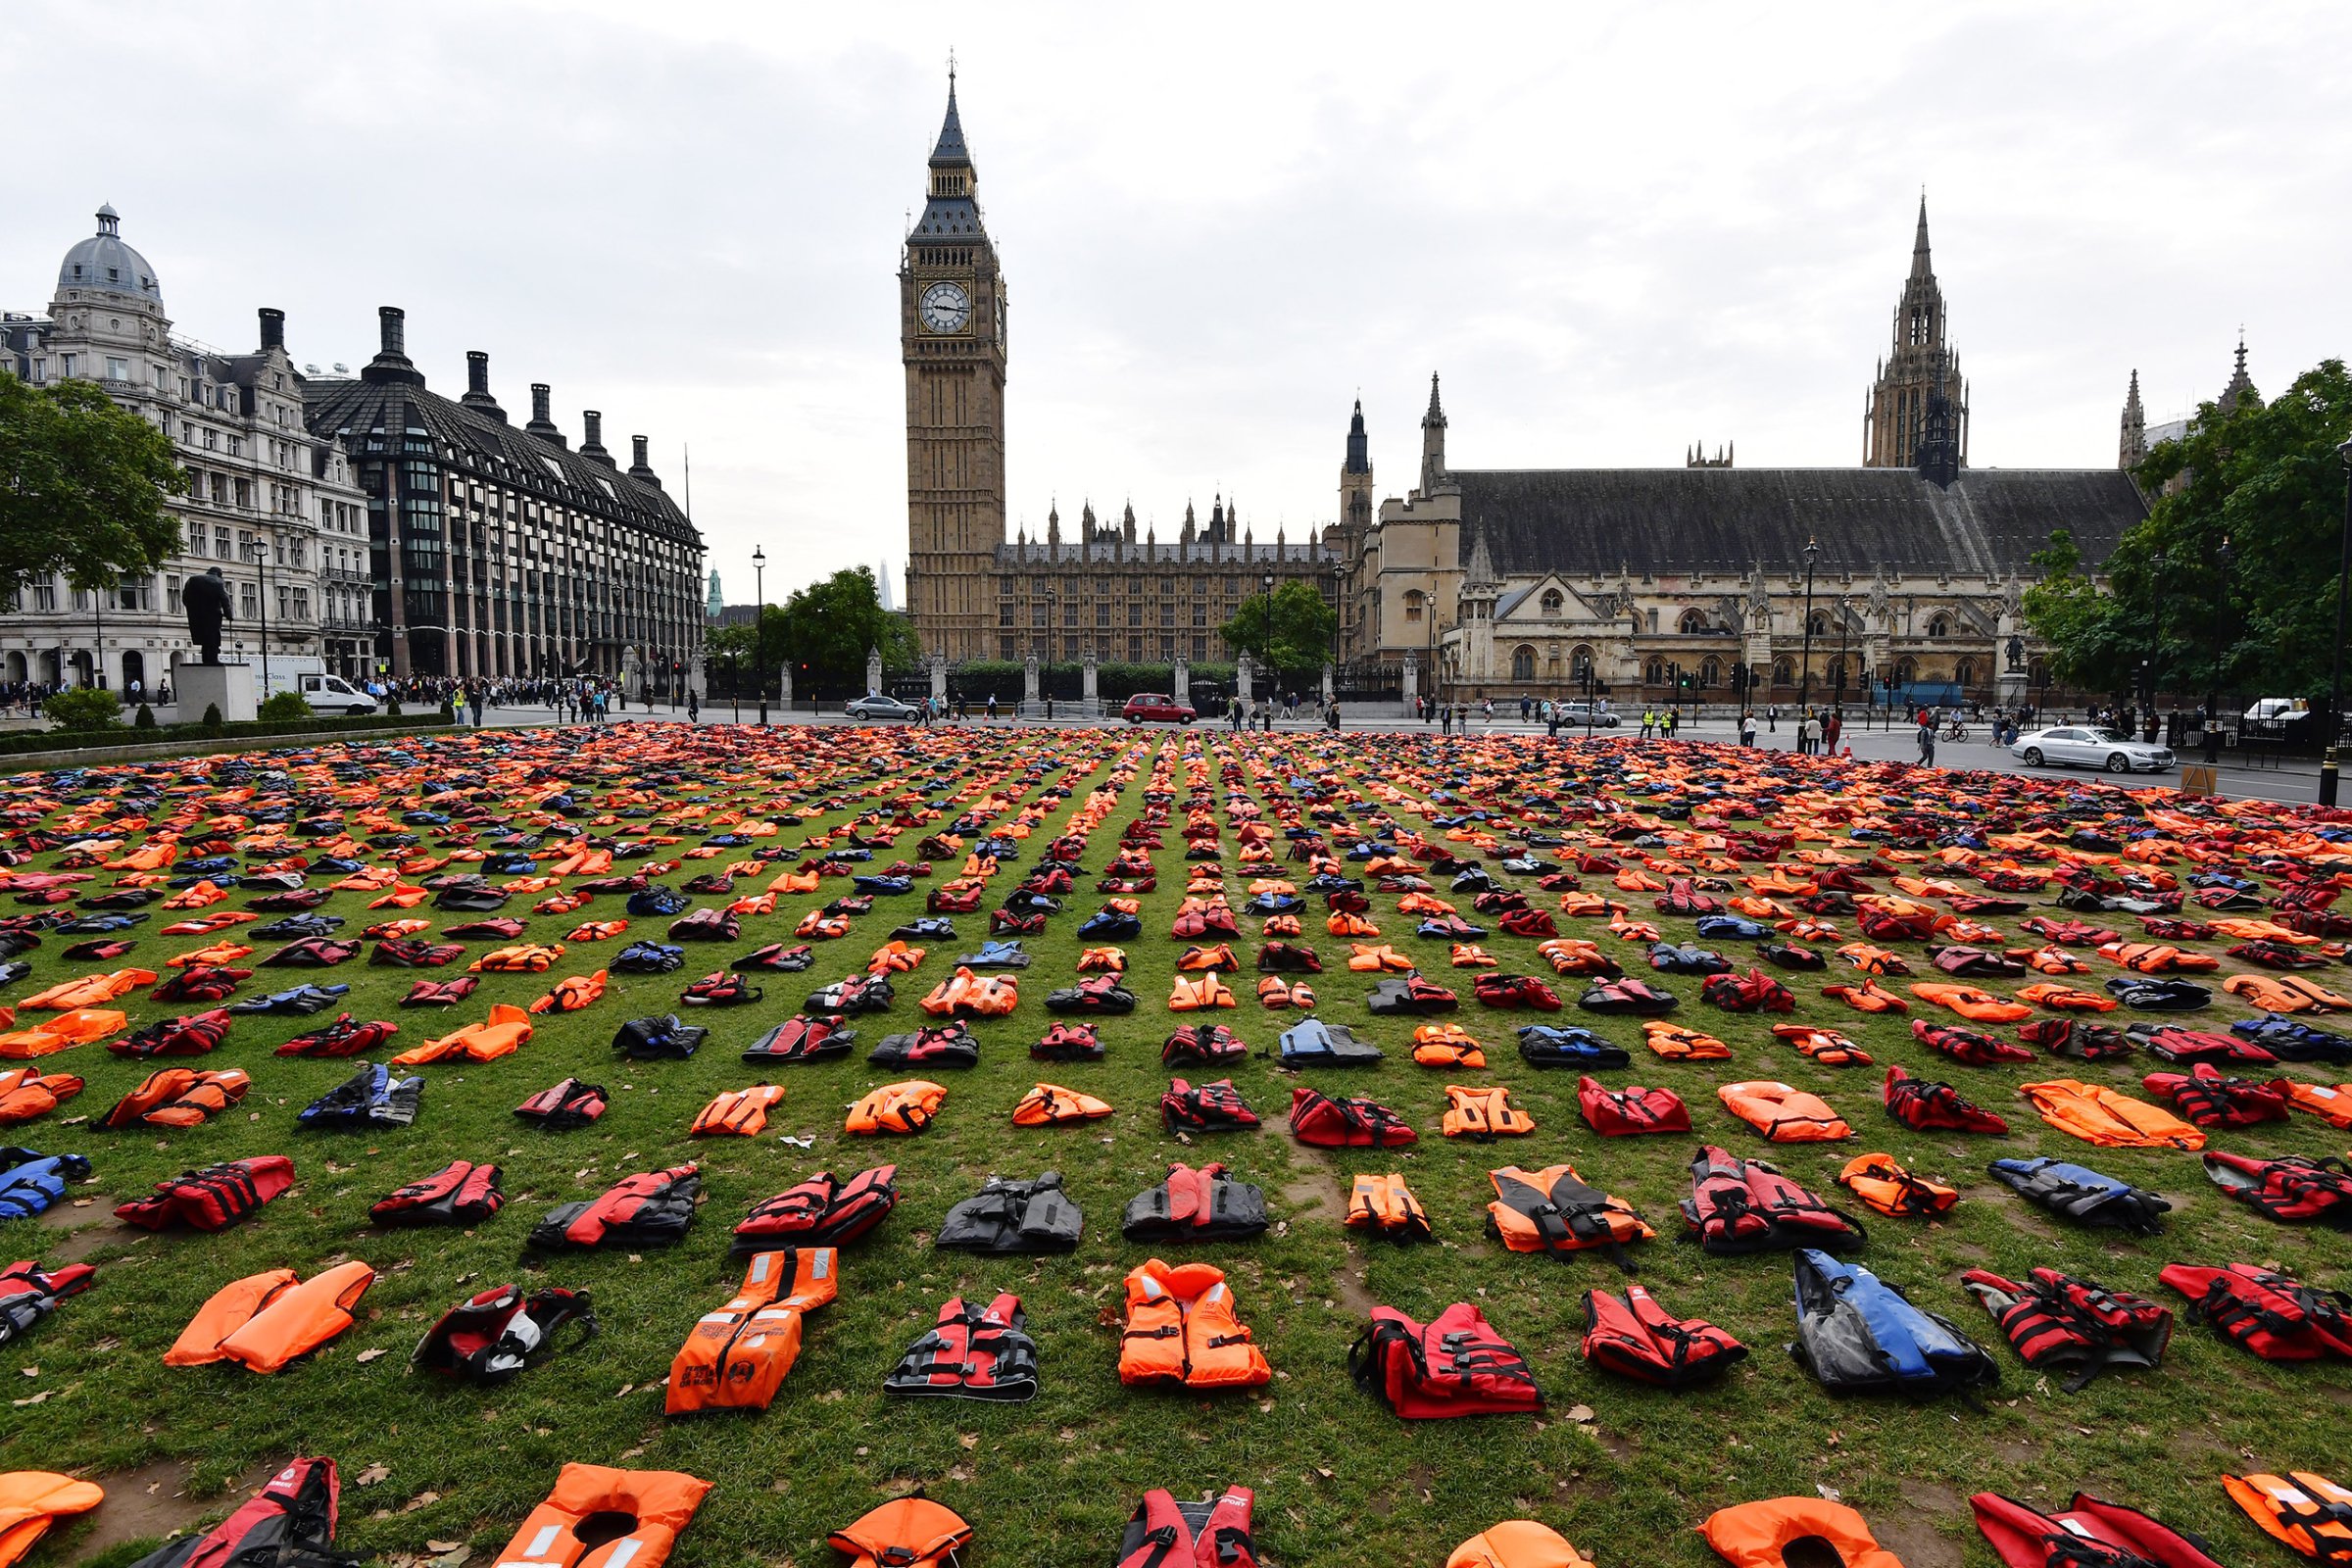 Lifejackets that have been used by refugees to cross the sea to Europe are laid out in Parliament Square in London on Sept. 19, 2016.